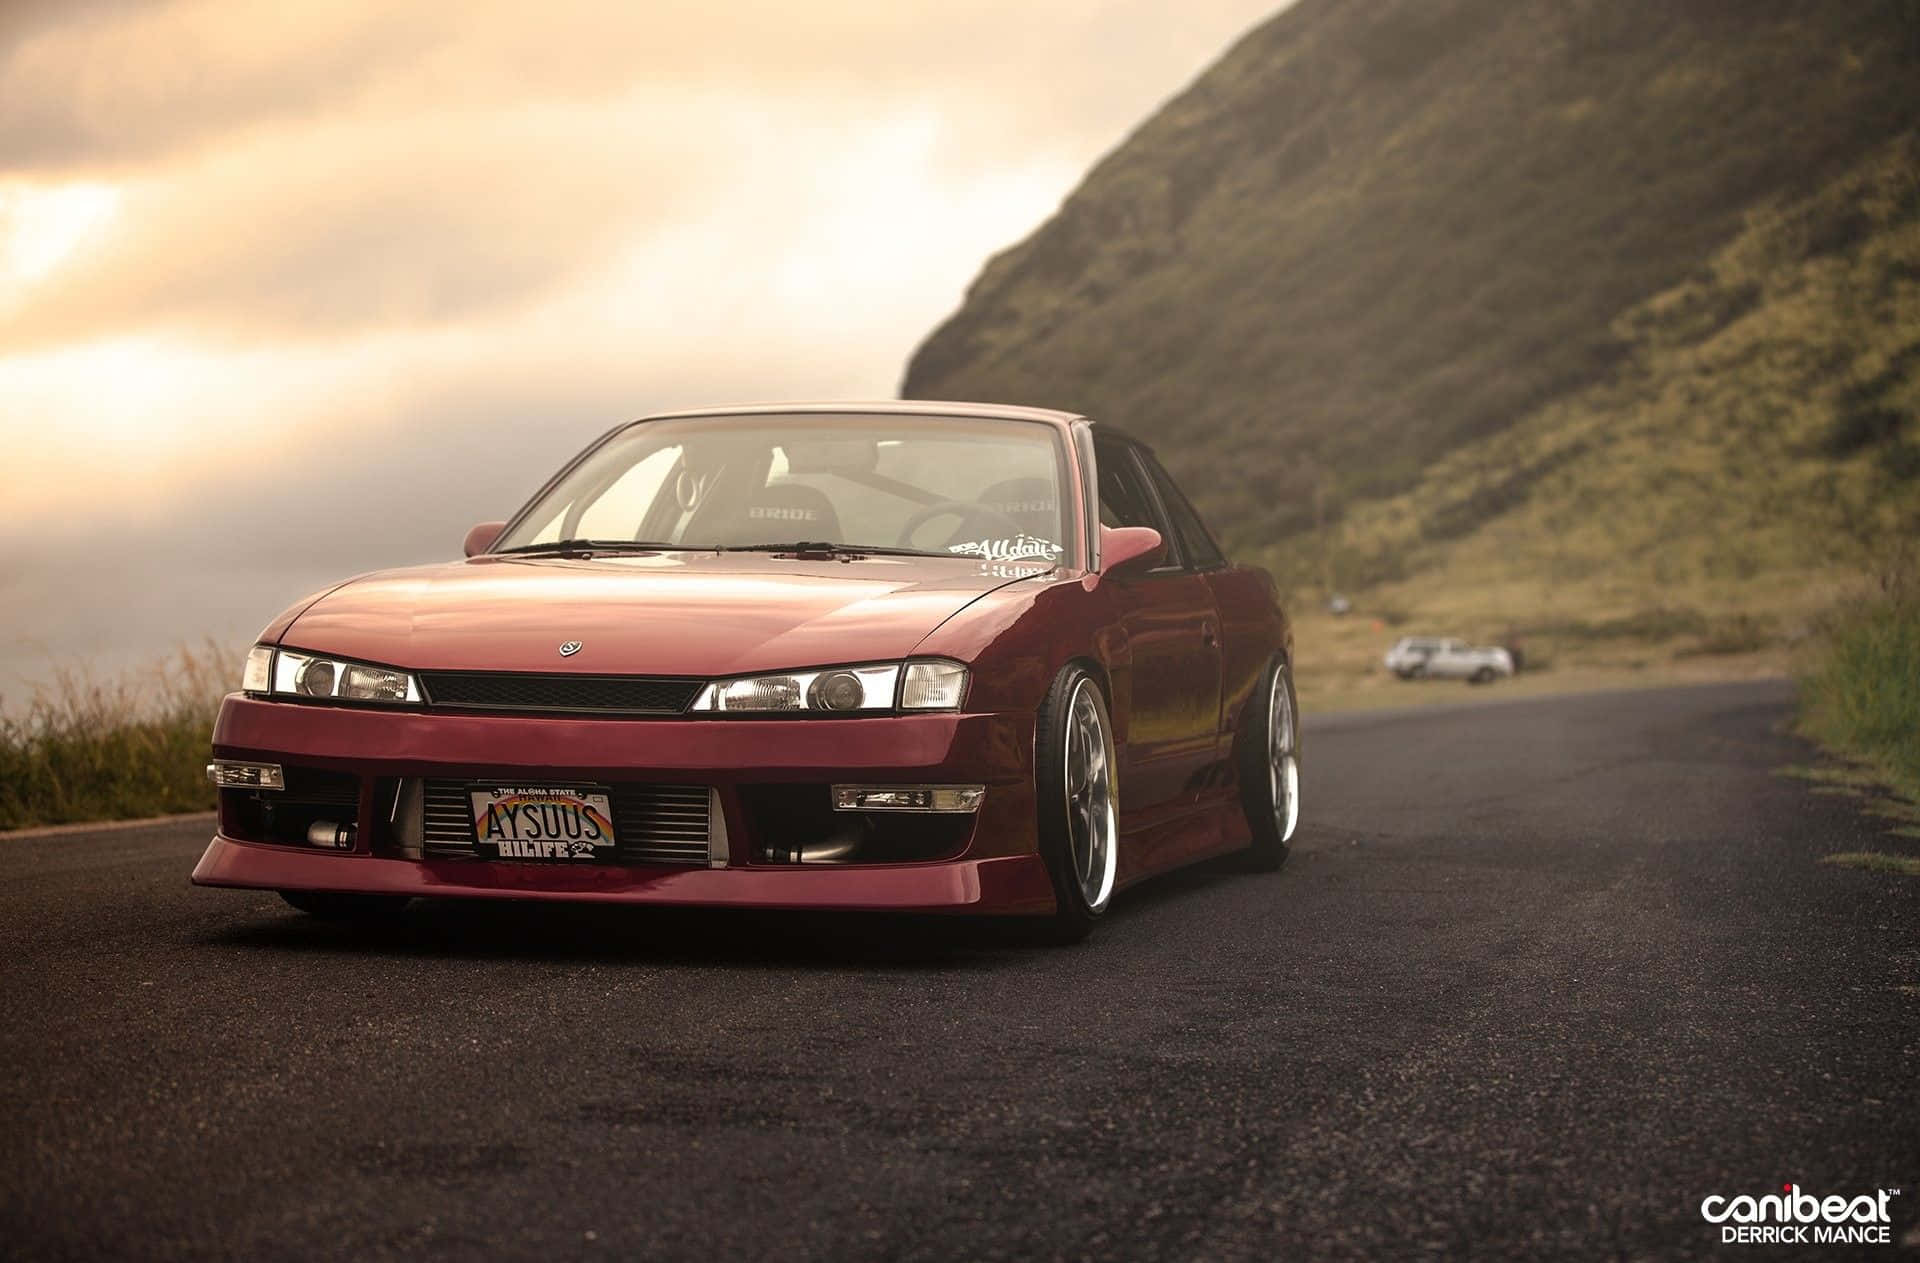 This Nissan Silvia S13 sports car is ready to roar. Wallpaper